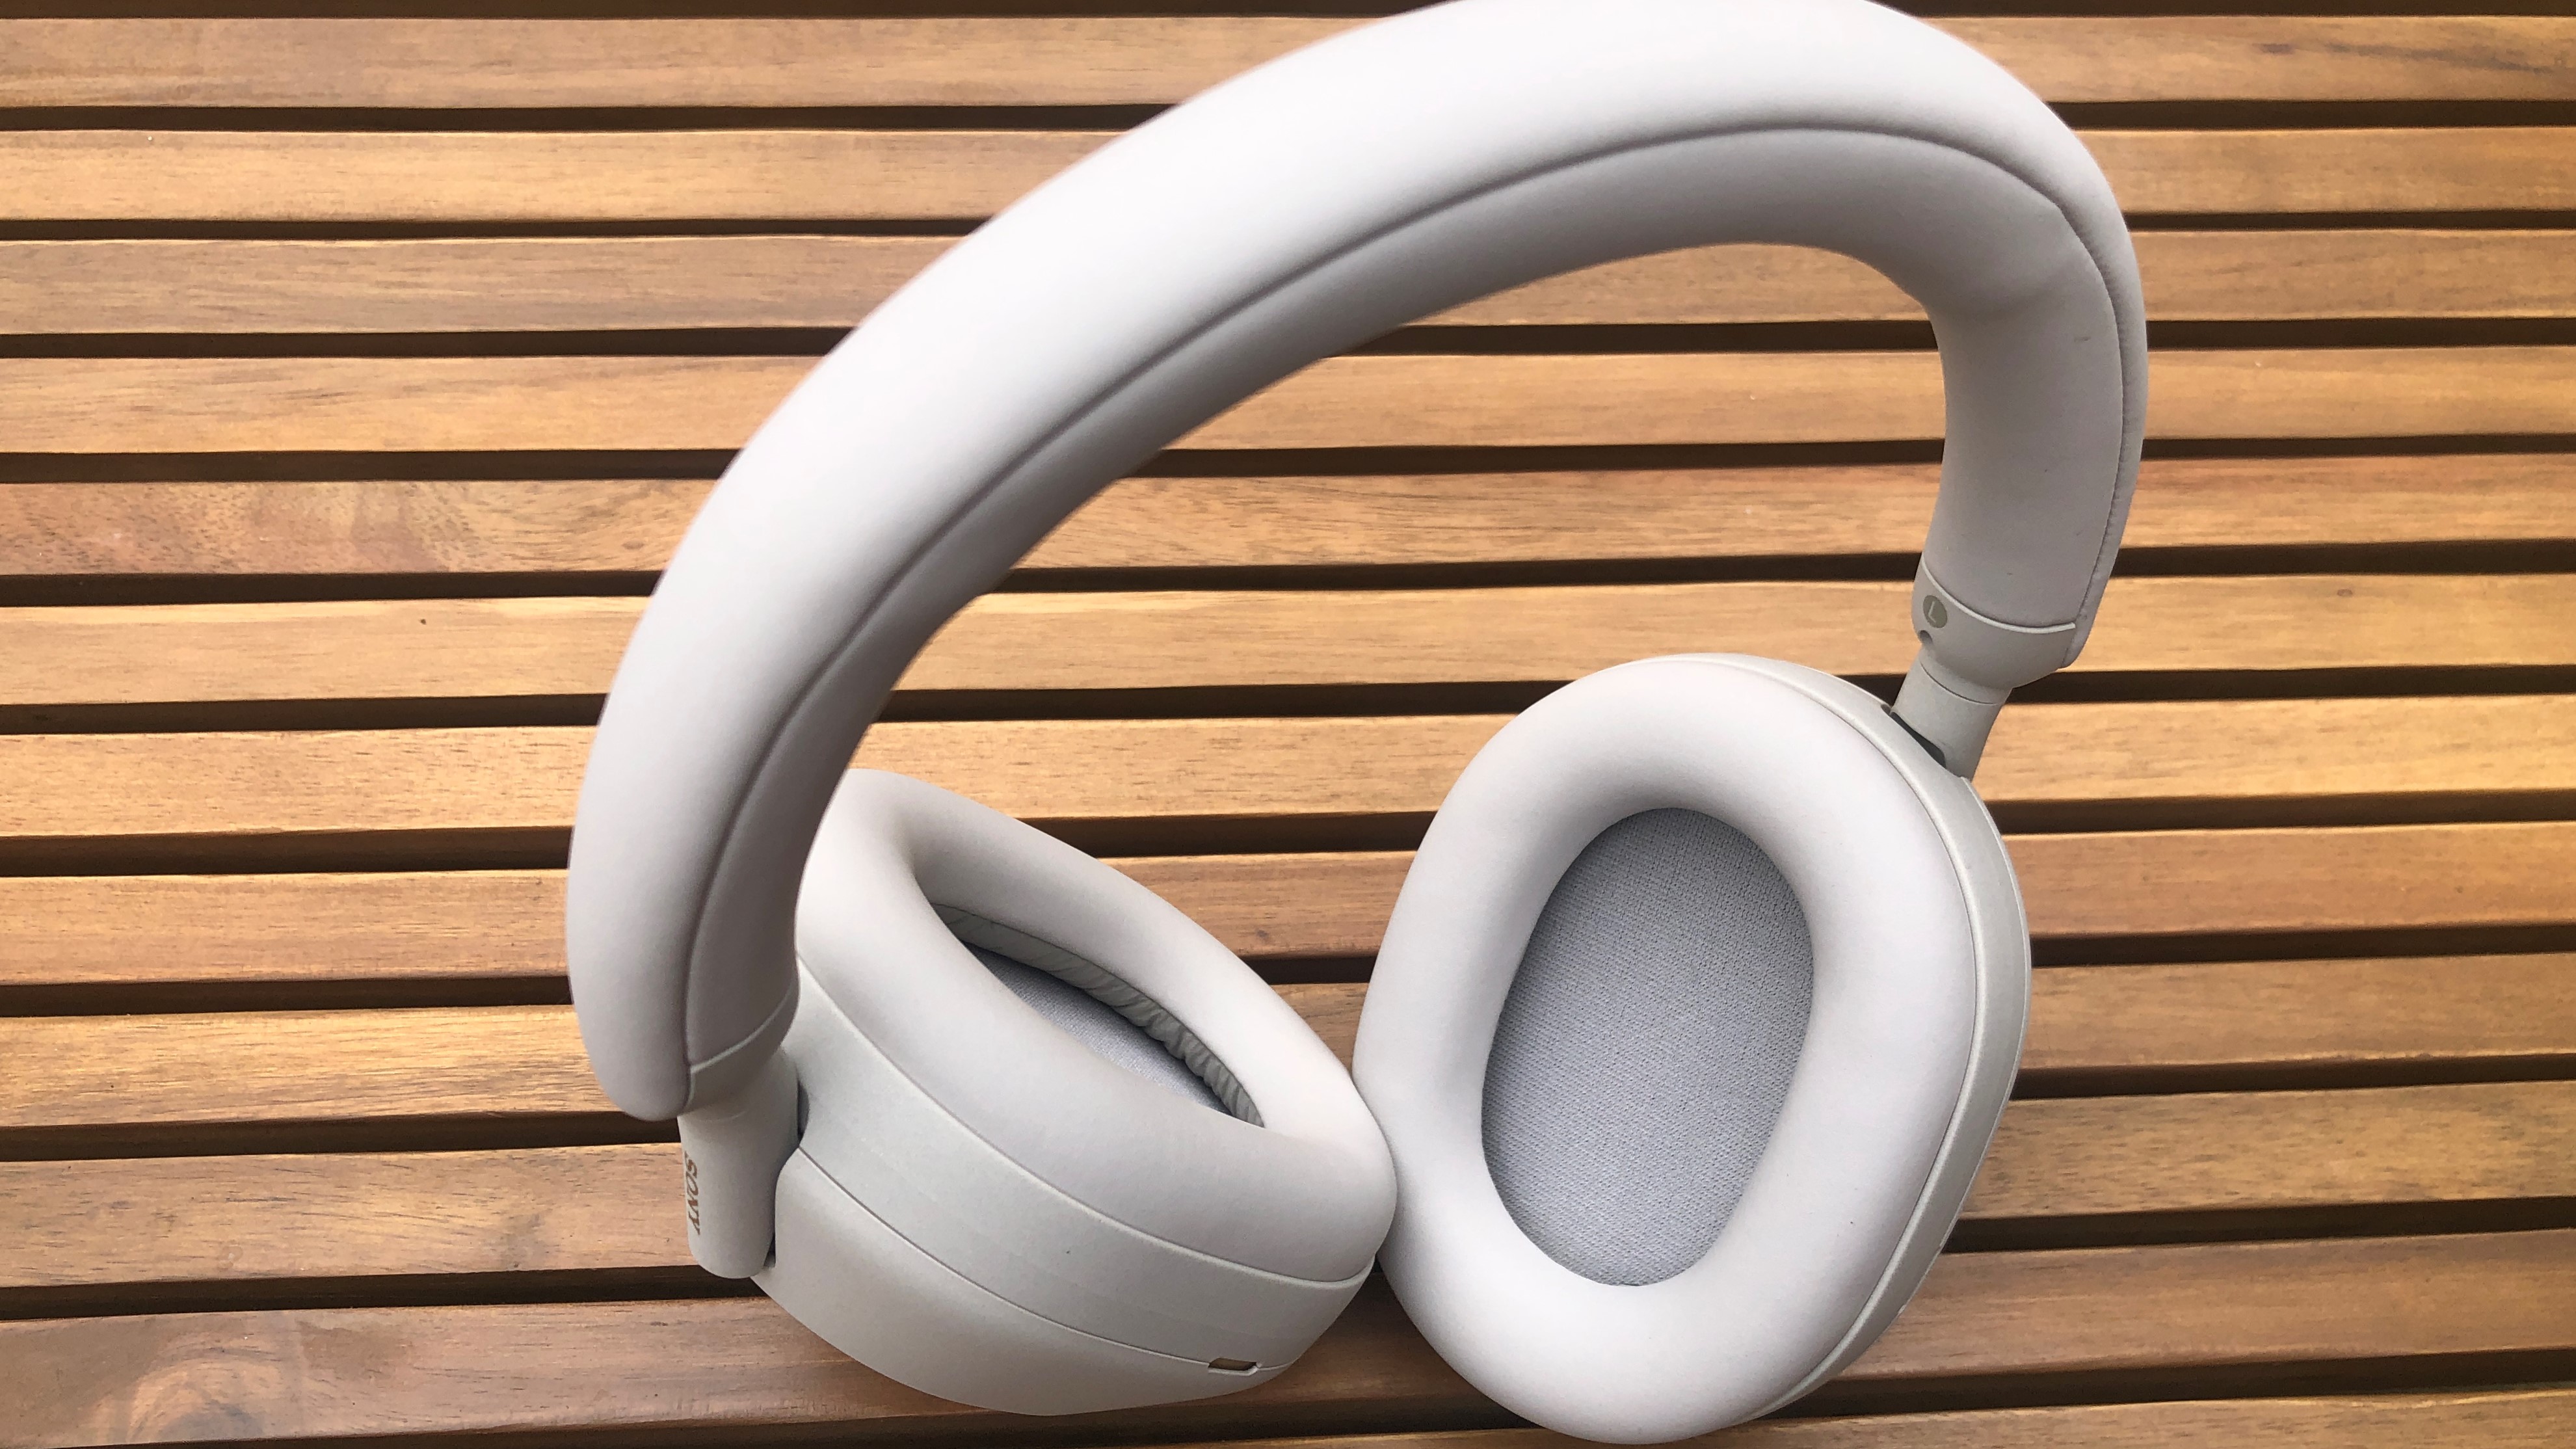 Sony XM5 headphones in ecru (off white) placed outdoors on a garden table